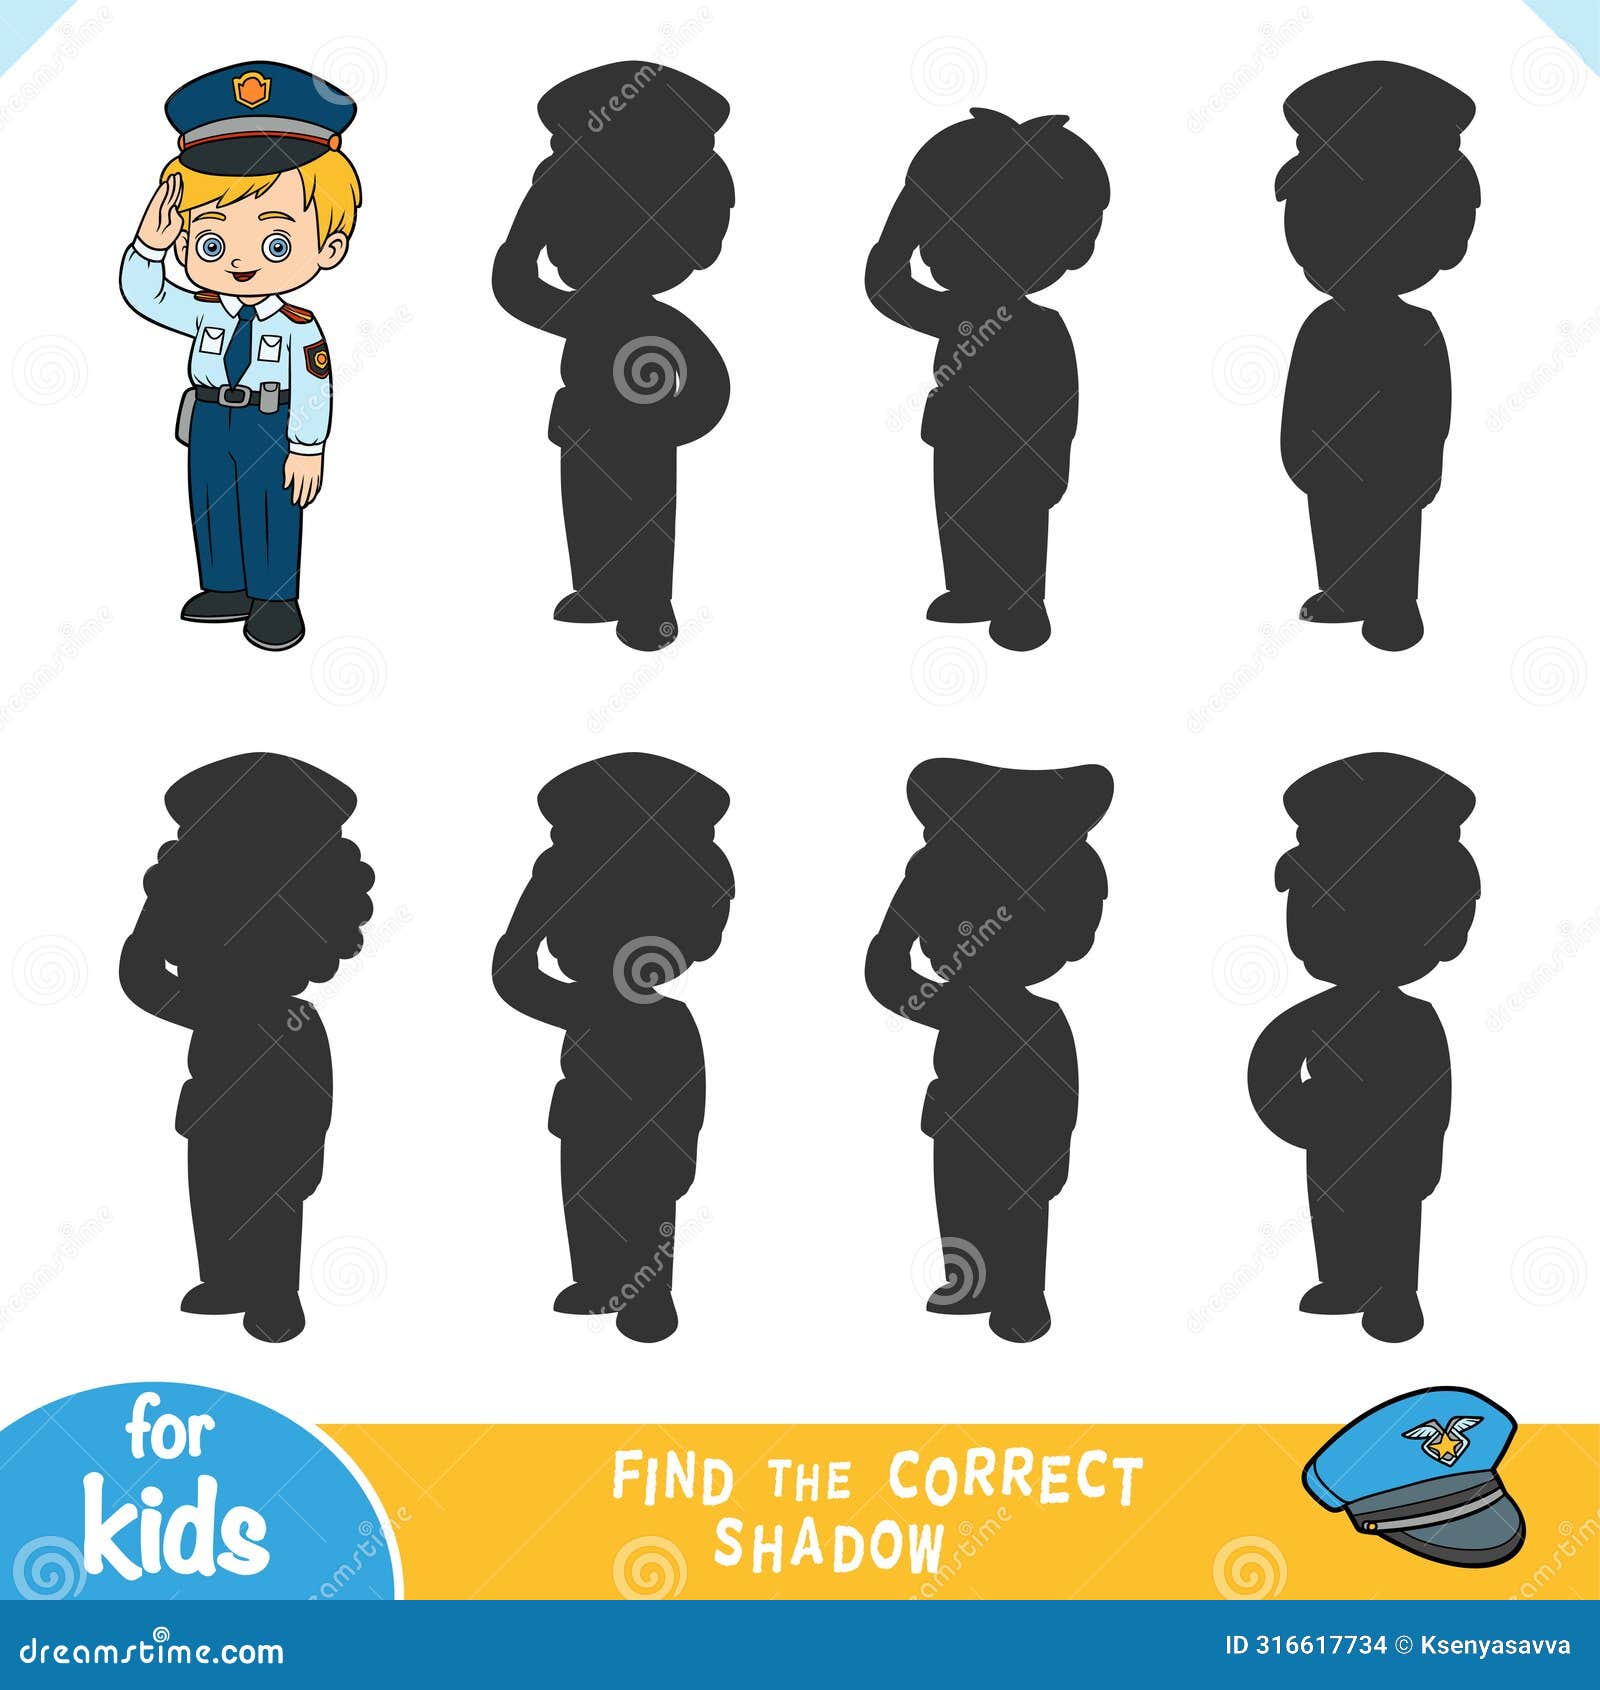 find the correct shadow, education game for kids, police officer